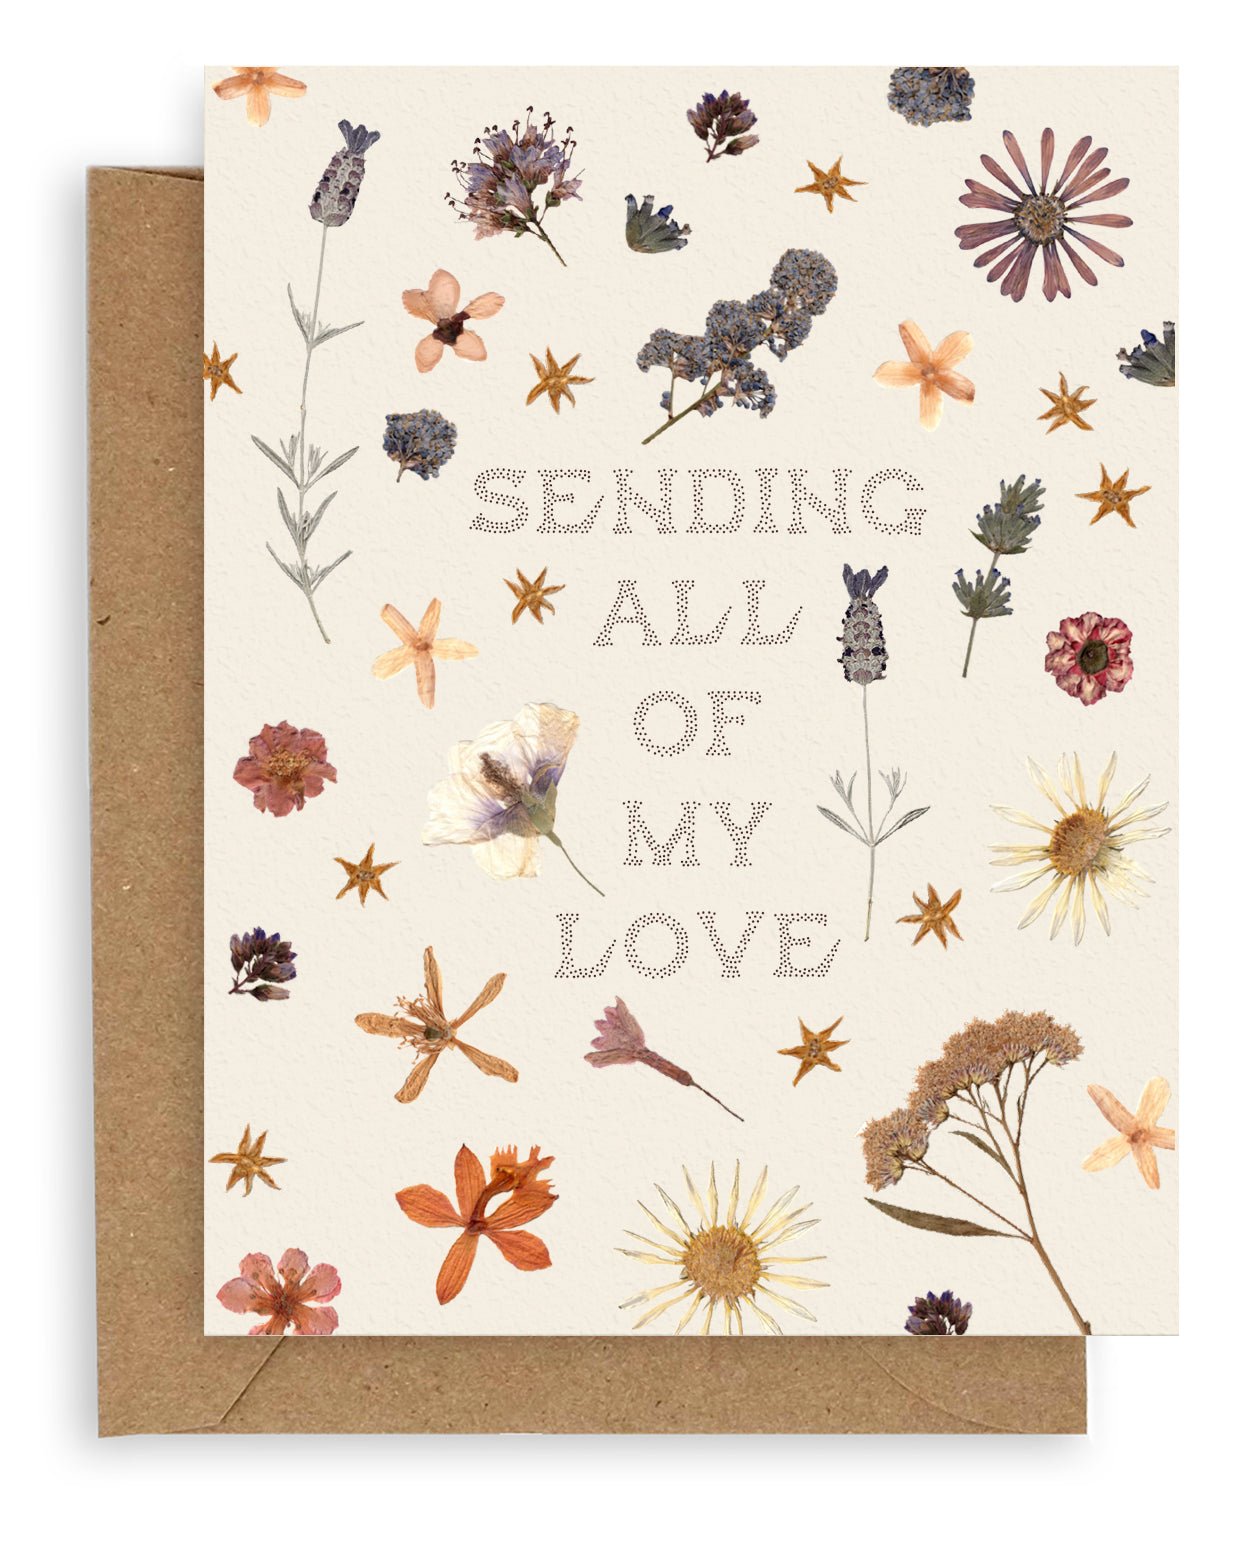 &quot;Sending All Of My Love&quot; pointillism text font design aligned in the center of the cream colored card surrounded by pressed flowers printed on cardstock with a kraft envelope.